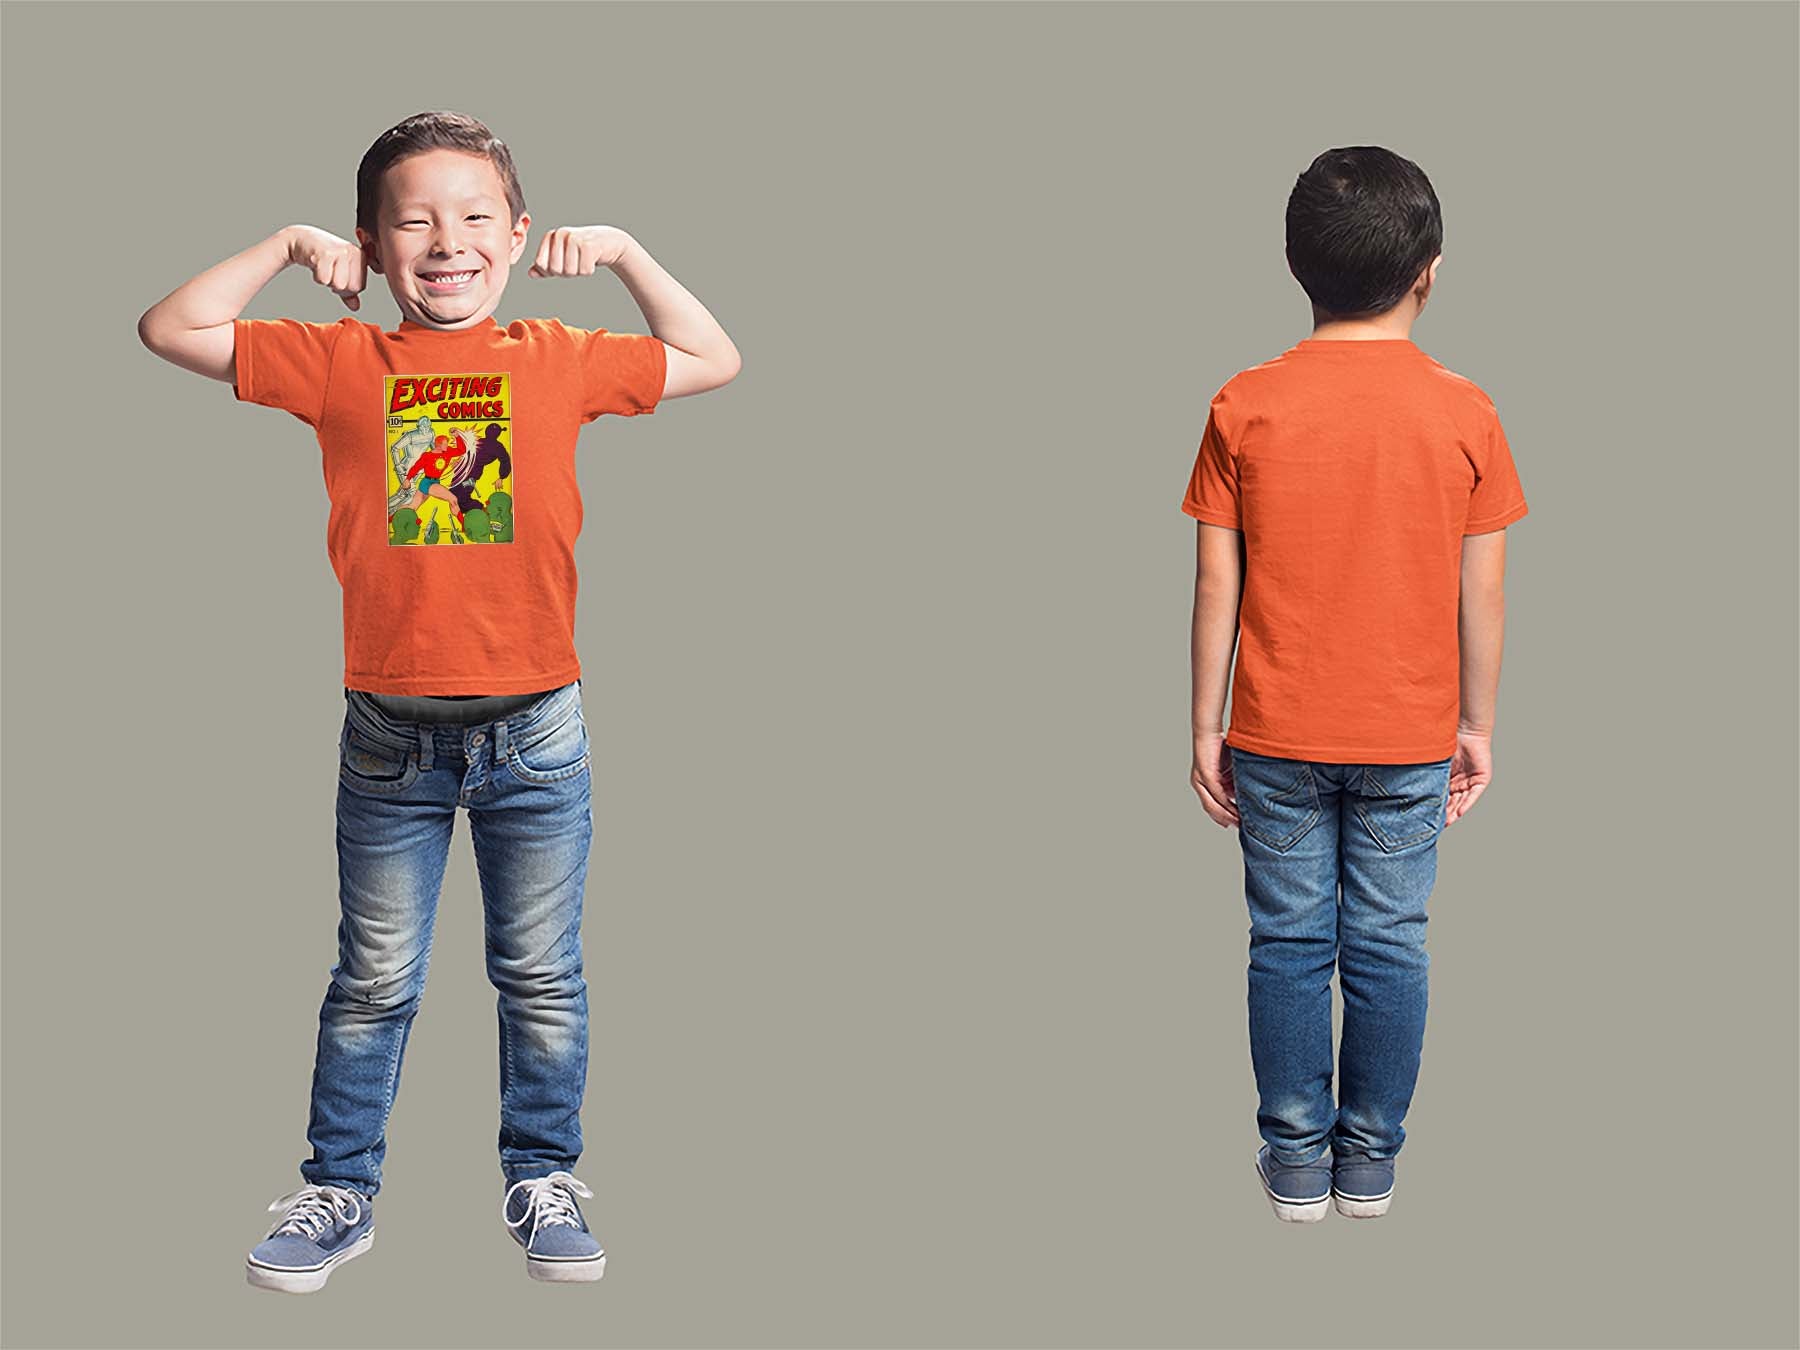 Exciting Comics No.1 Youth T-Shirt Youth Small Orange